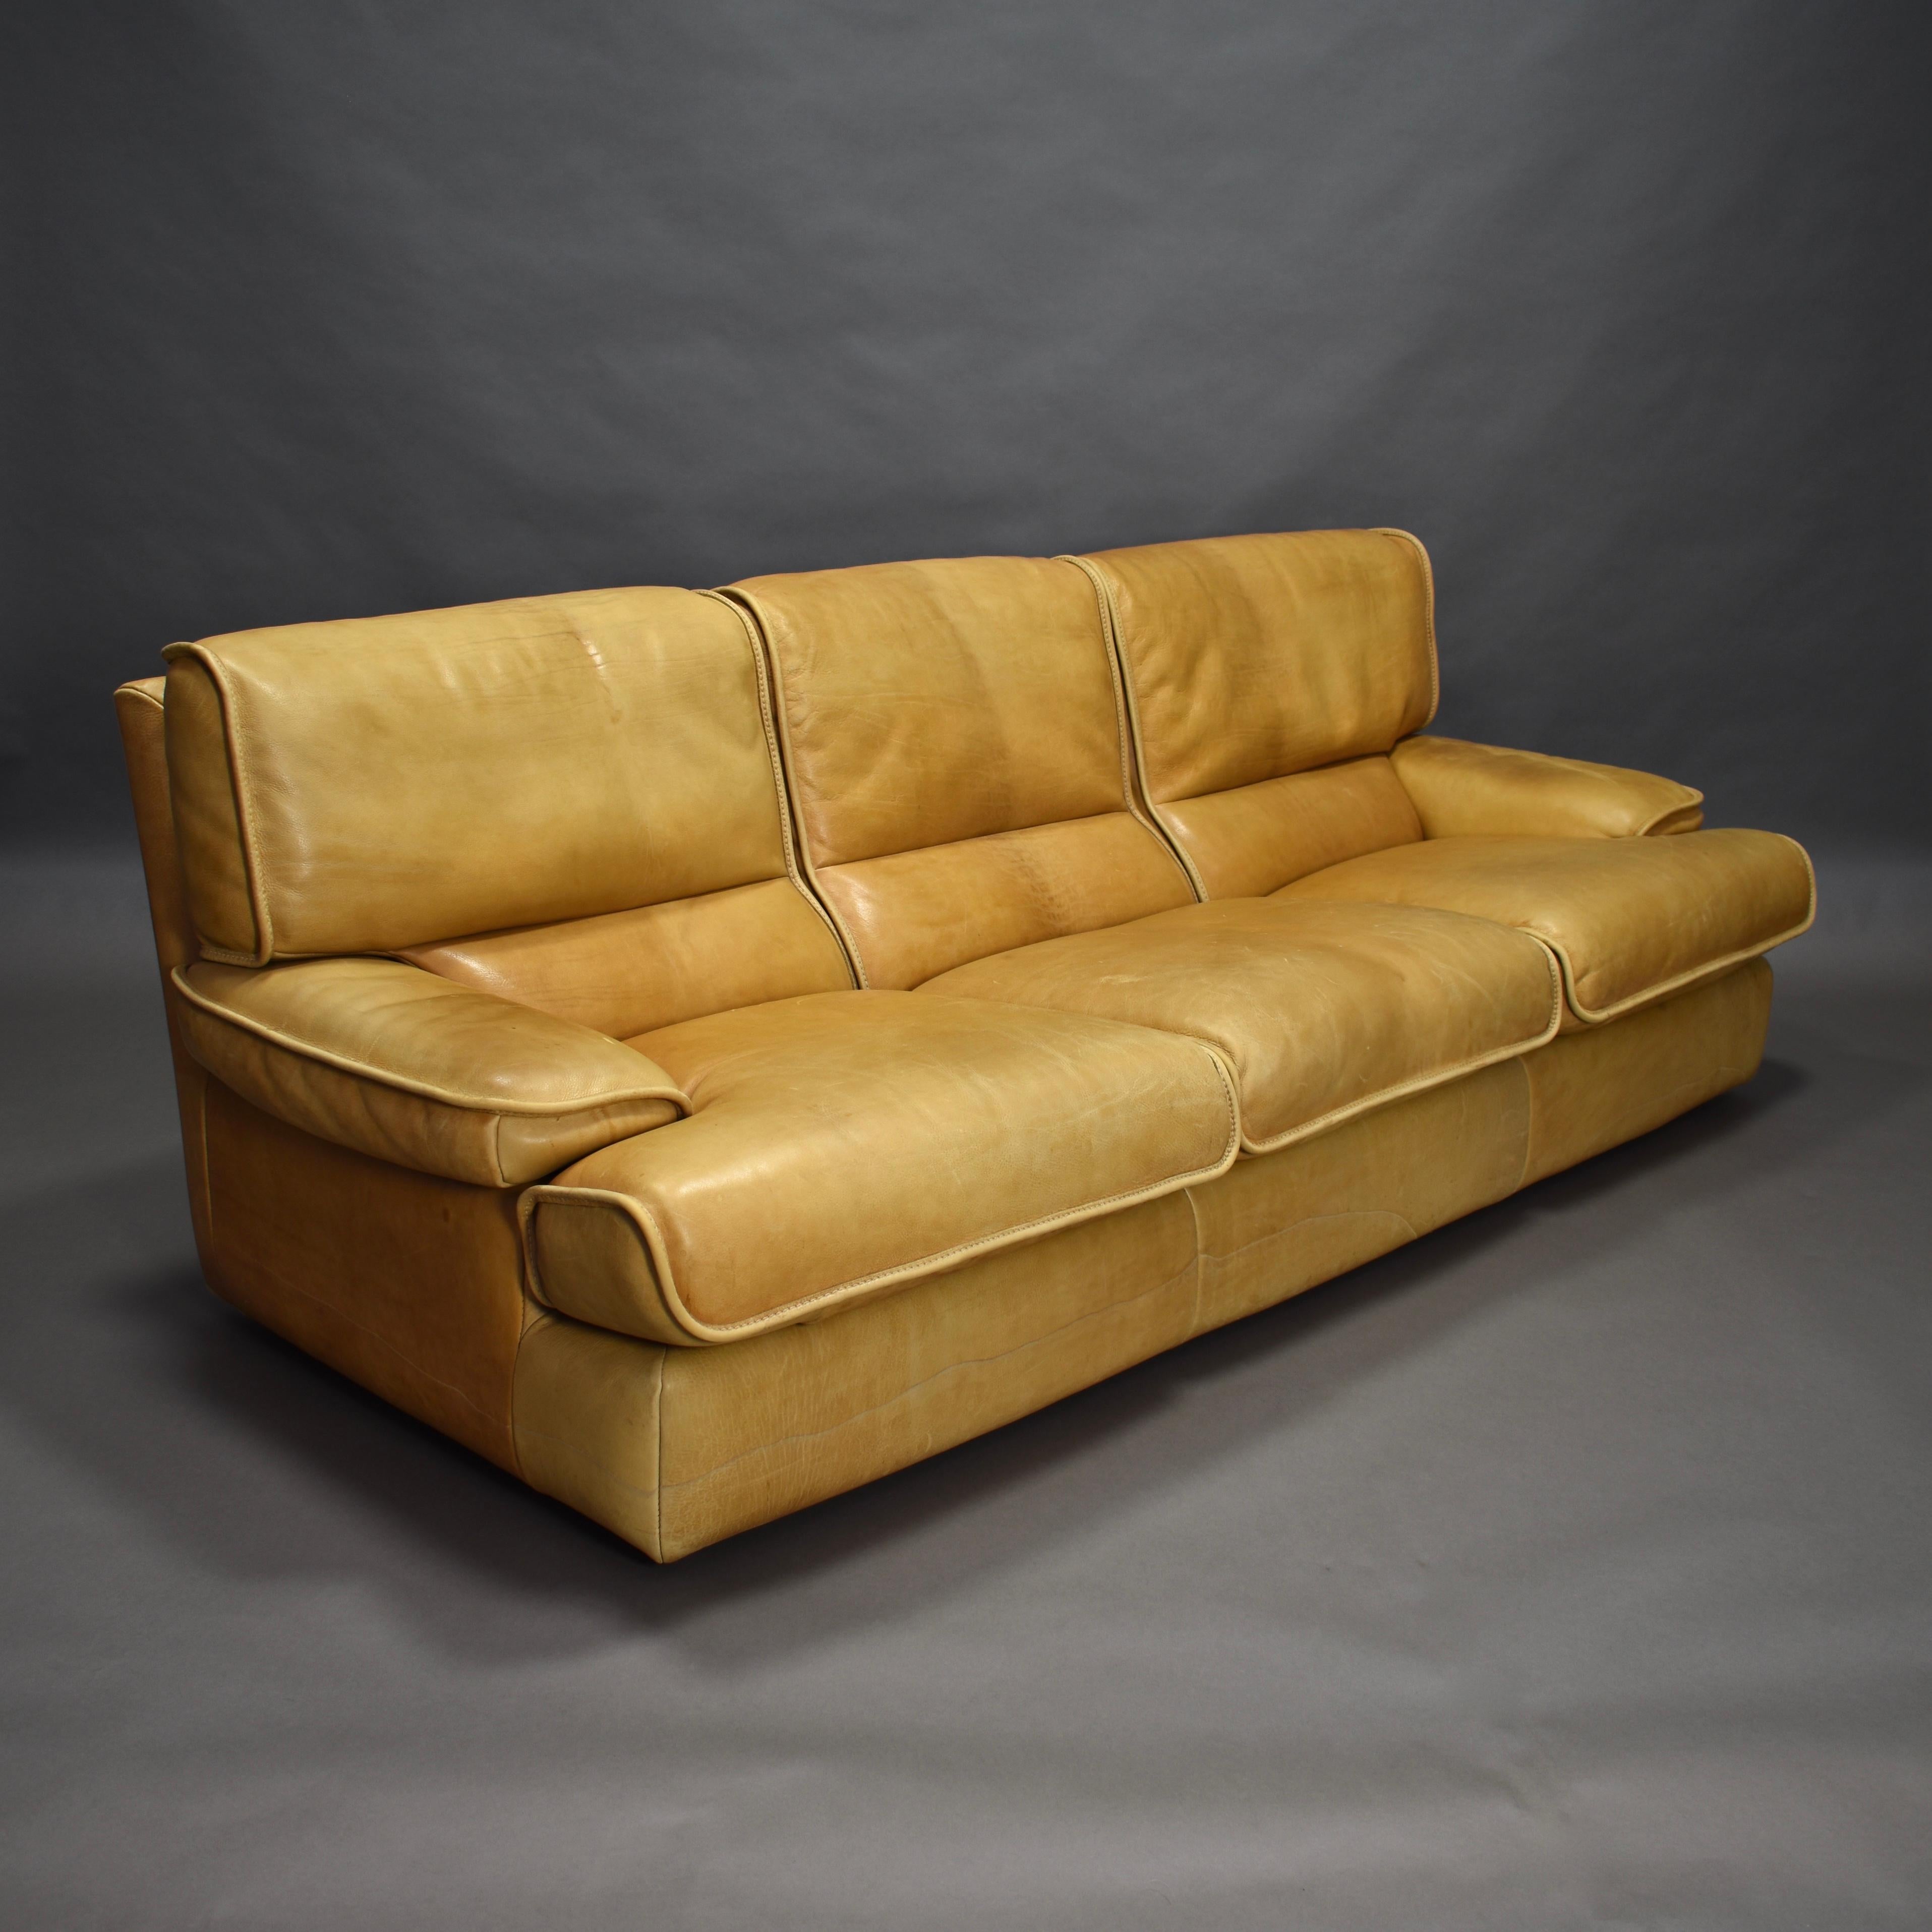 1970s sofa in beautiful Tan leather. The sofa is made in a thick and sturdy tan leather of very high quality. It is very comfortable, durable and still remains in very good vintage condition. Some normal signs of age and use but with minimal wear